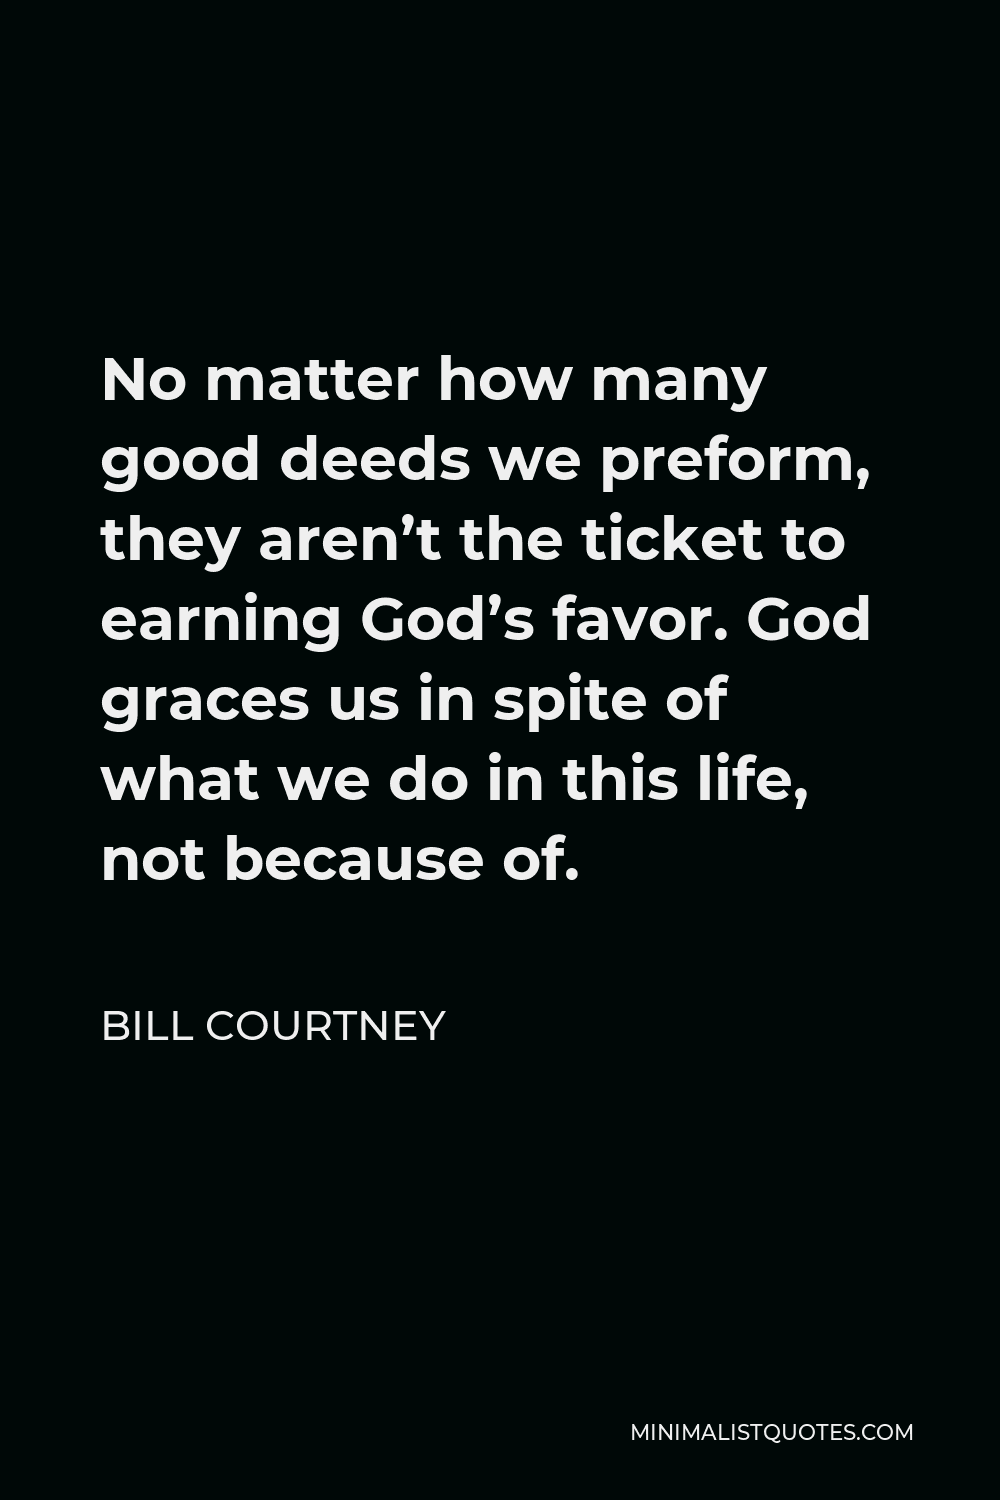 Bill Courtney Quote - No matter how many good deeds we preform, they aren’t the ticket to earning God’s favor. God graces us in spite of what we do in this life, not because of.